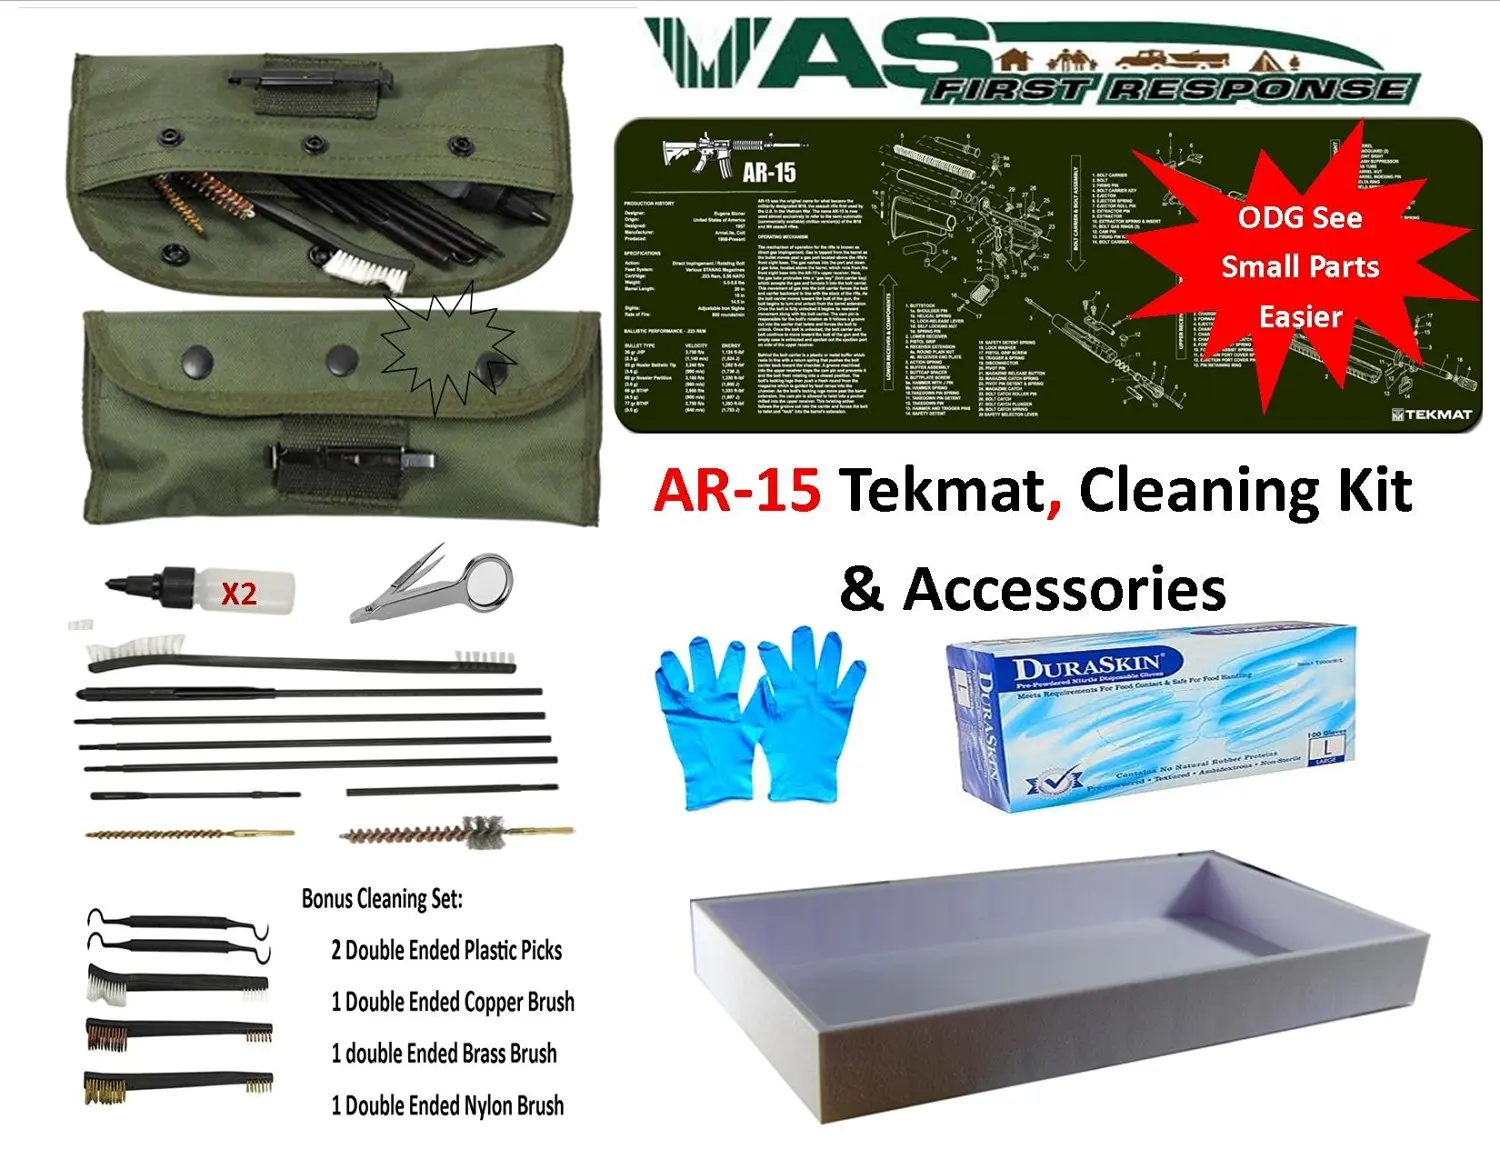 Buy VAS DELUXE AR-15 RIFLE CLEANING KIT & ACCESSORIES WITH AR-15 TEKMAT